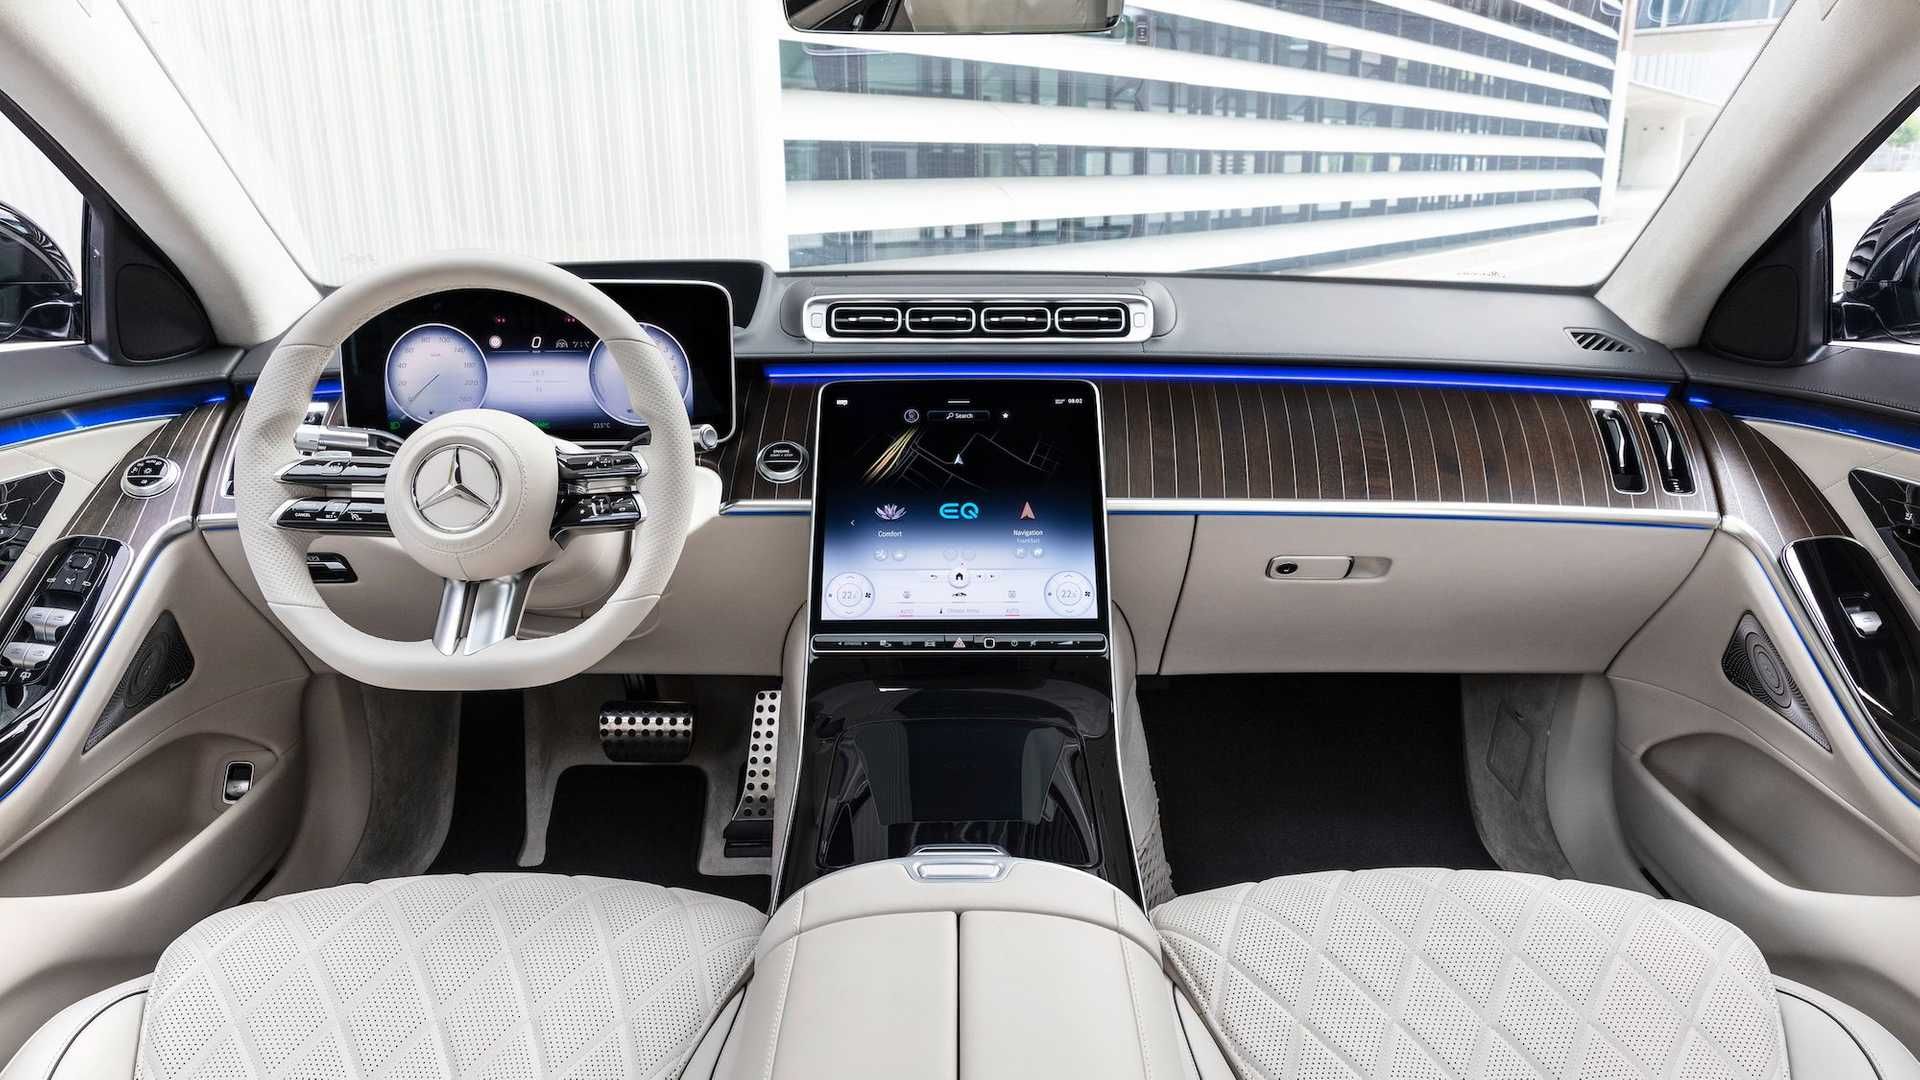 An image showing the inside of the new Mercedes Benz S580e interior 